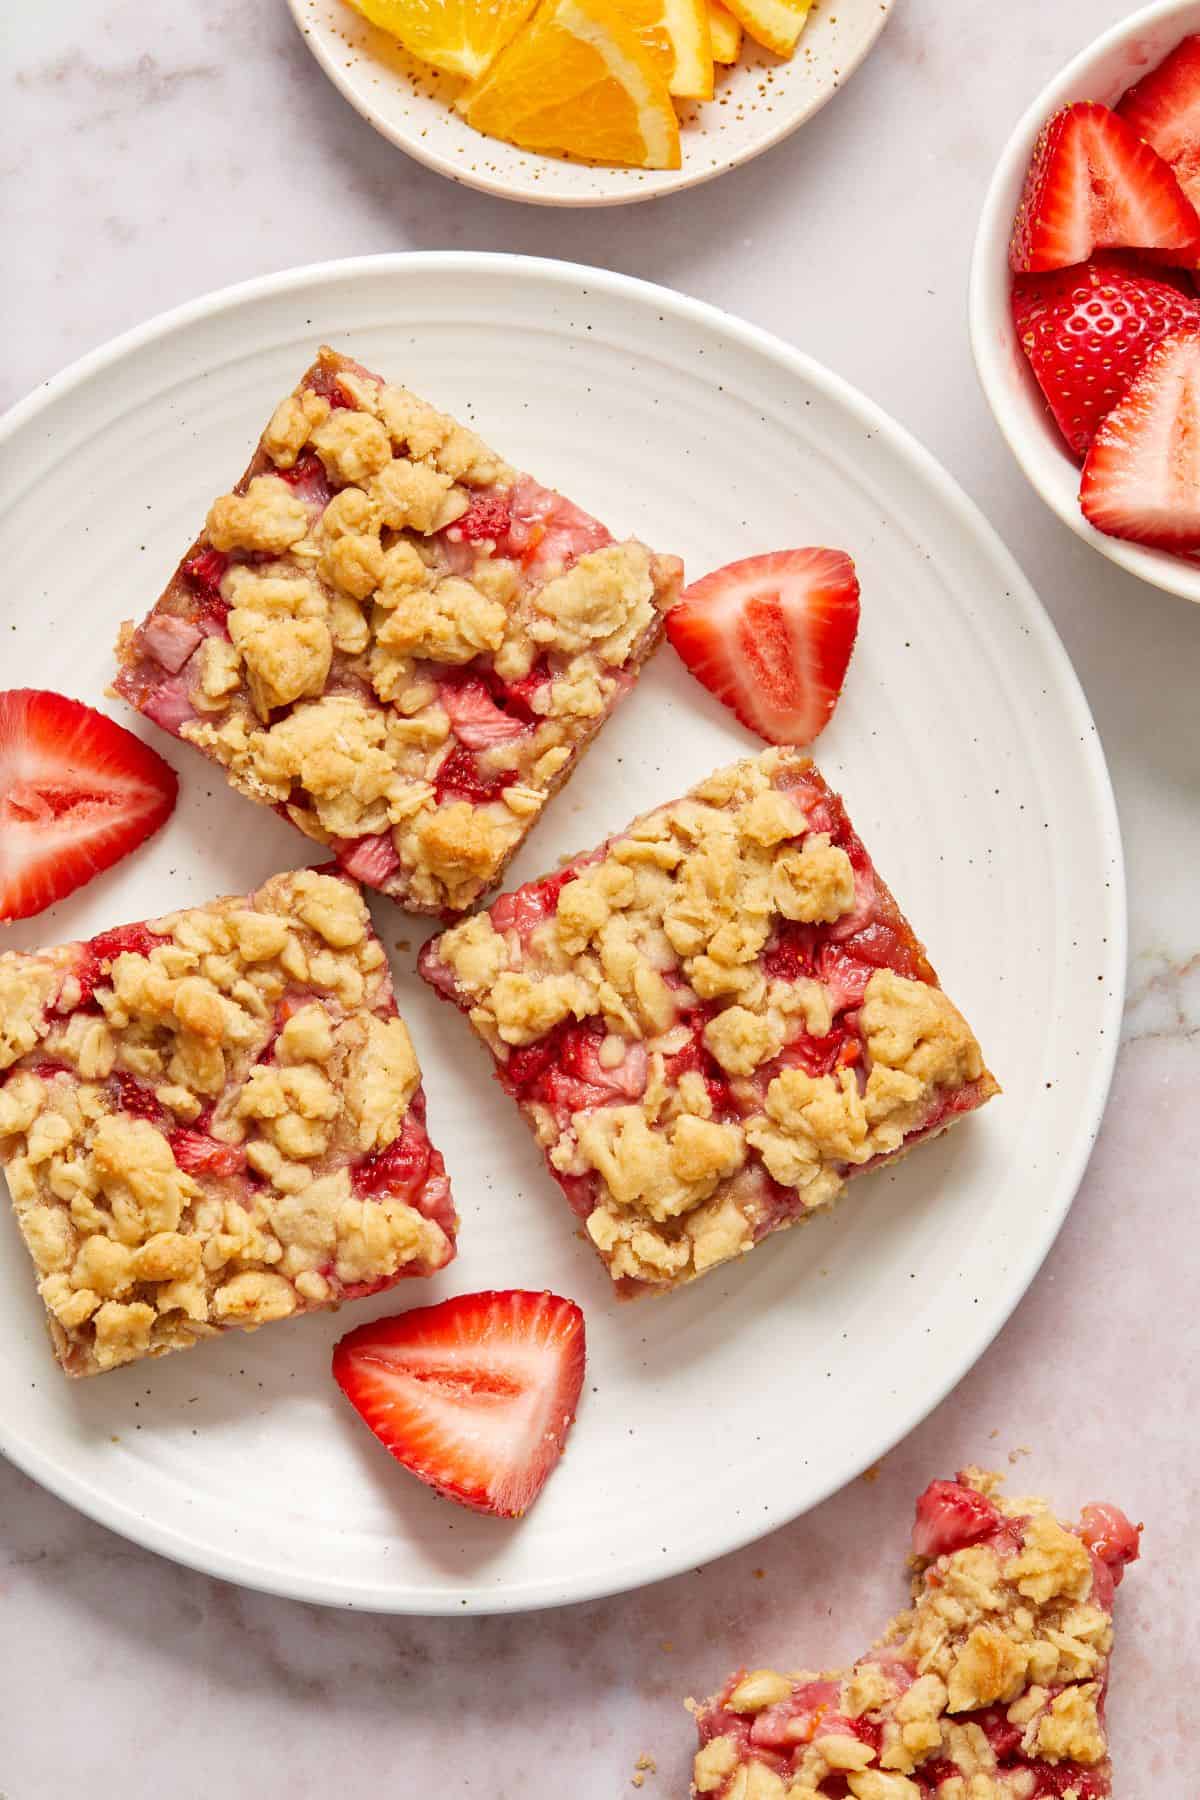 Three cut squares of Strawberry Oatmeal Bars on a round white plate, with some cut strawberry pieces.